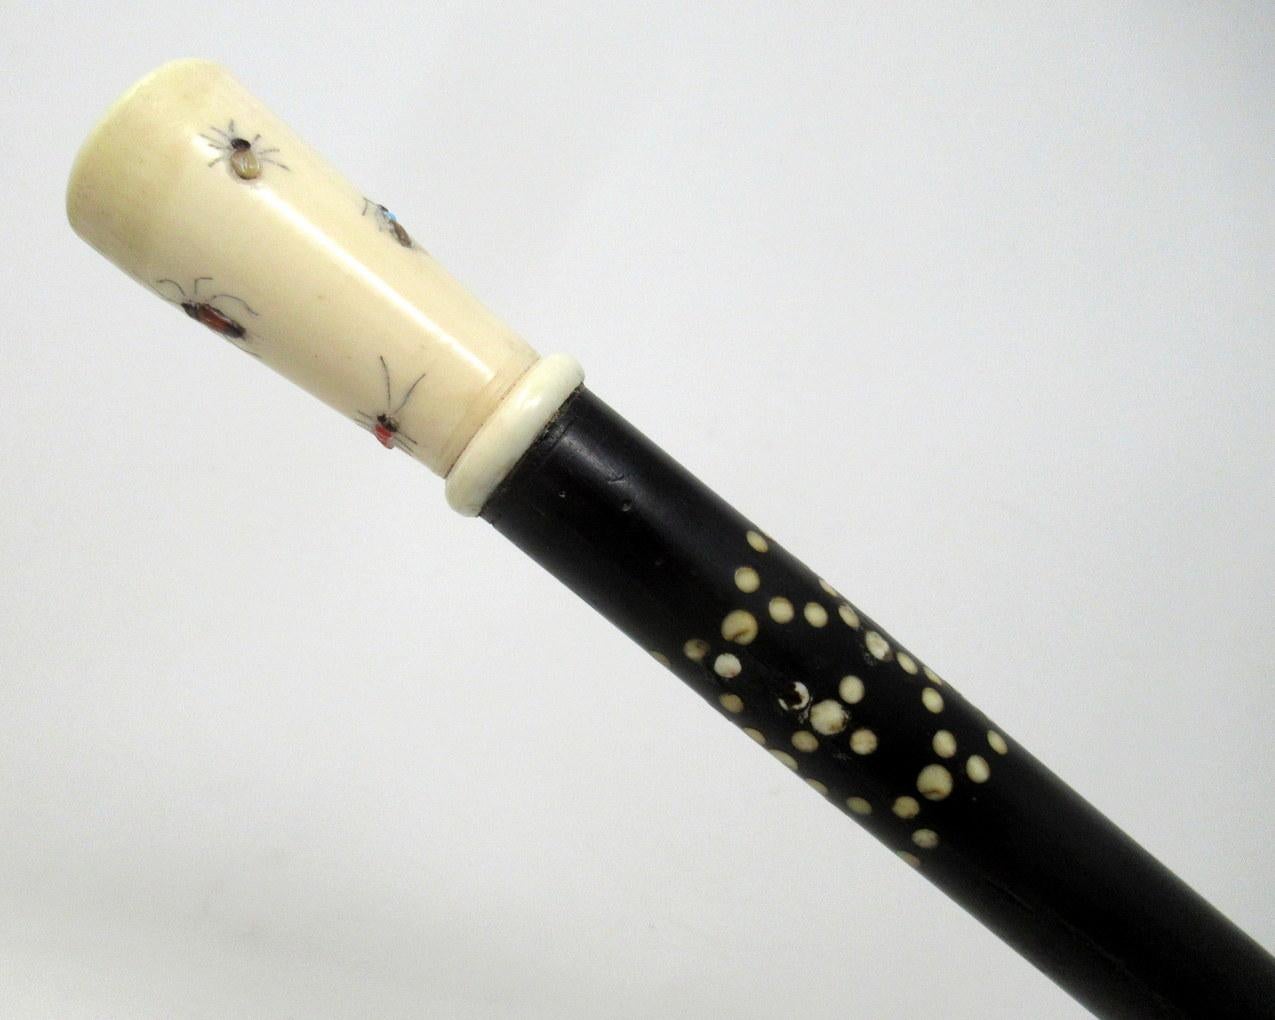 Fine quality highly decorative bone mounted Japanese Shibayama polished bone ladies or gentleman's walking cane, late 19th, early 20th century. 

The Shibayama inlaid stylish grained bone grip decorated with inlaid beetles and other insects above